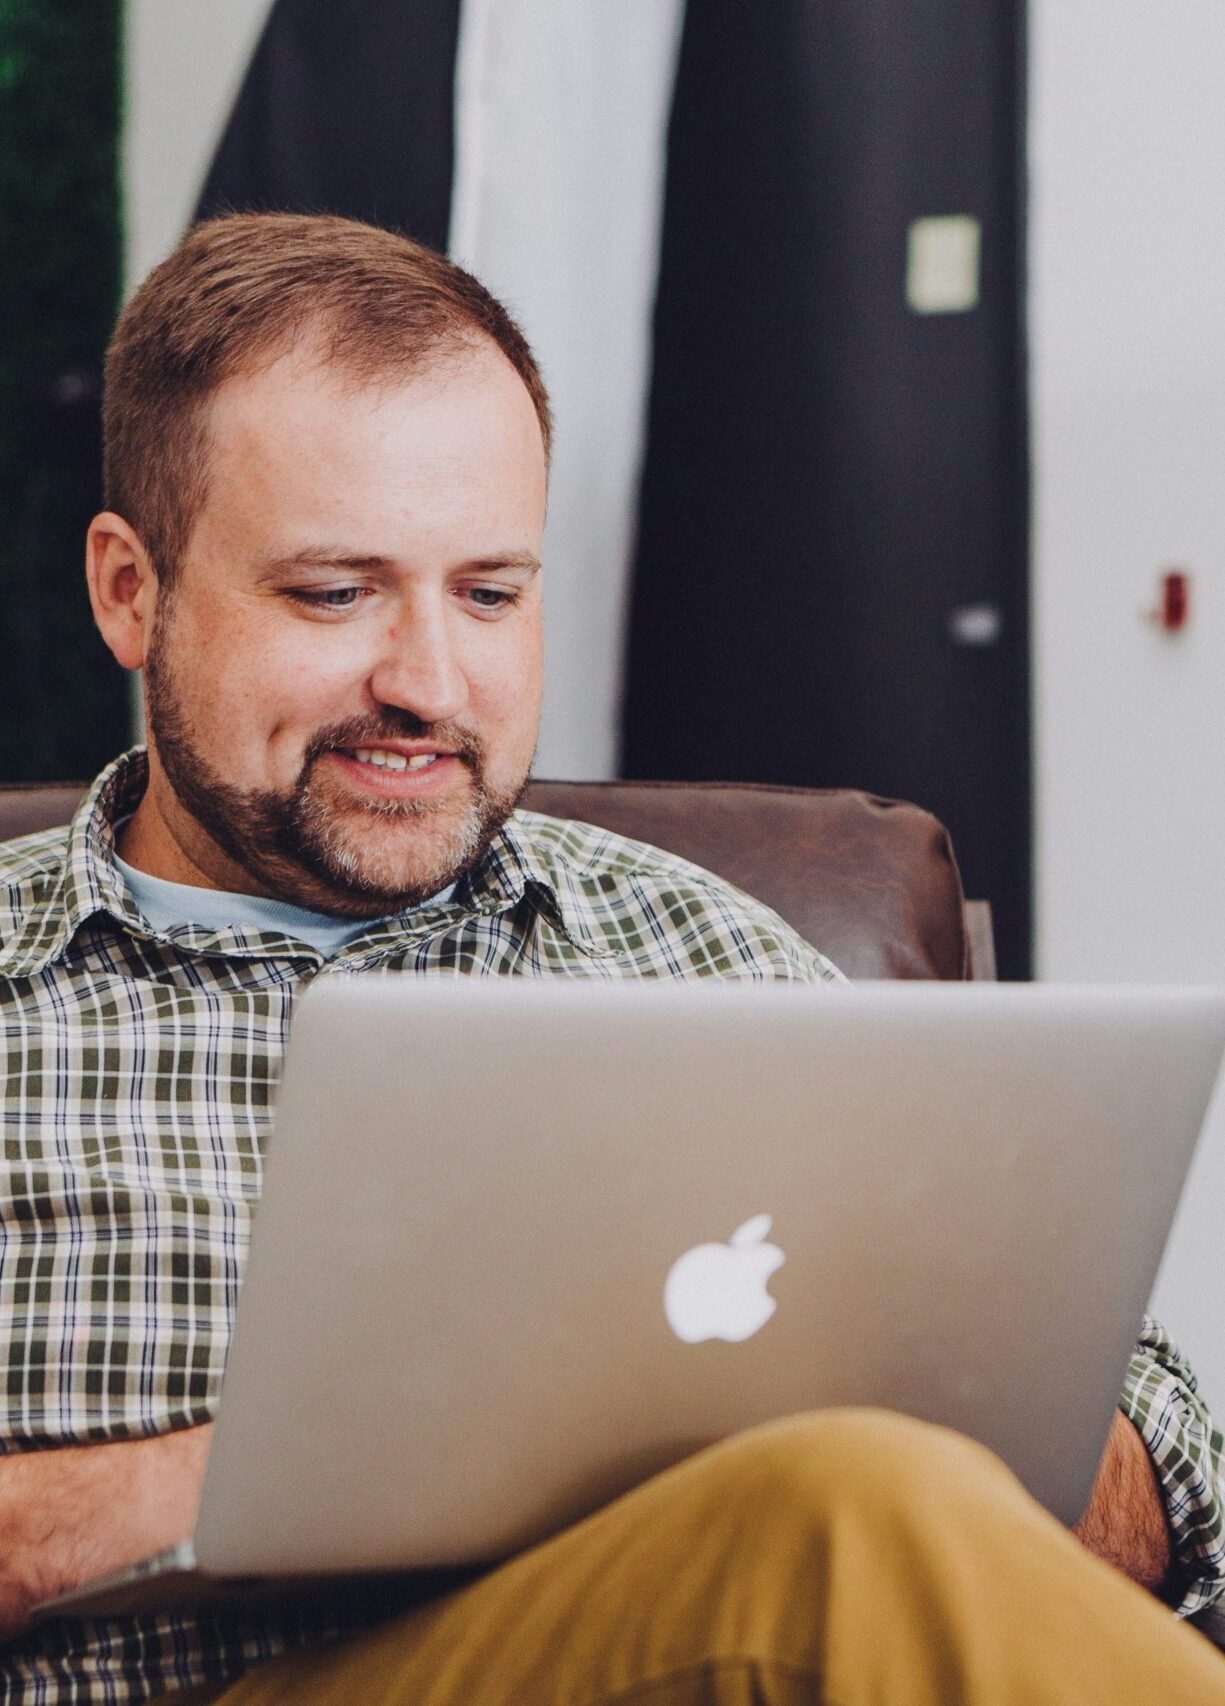 Man in blue checkered shirt on apple macbook while sitting in an office